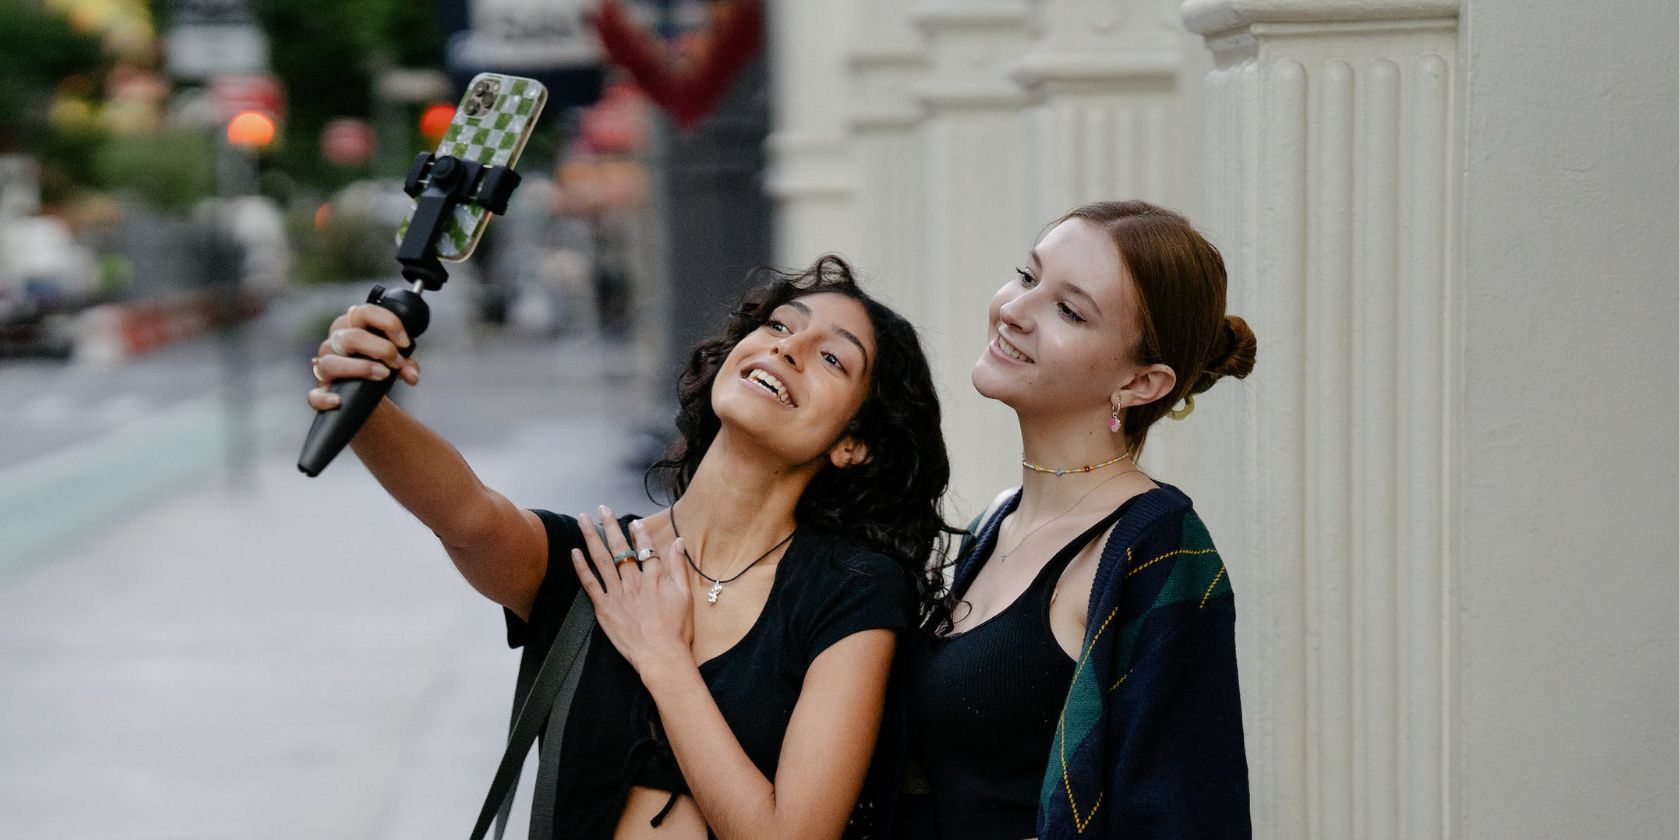 two women smiling and taking a selfie together on iphone using a short selfie stick 